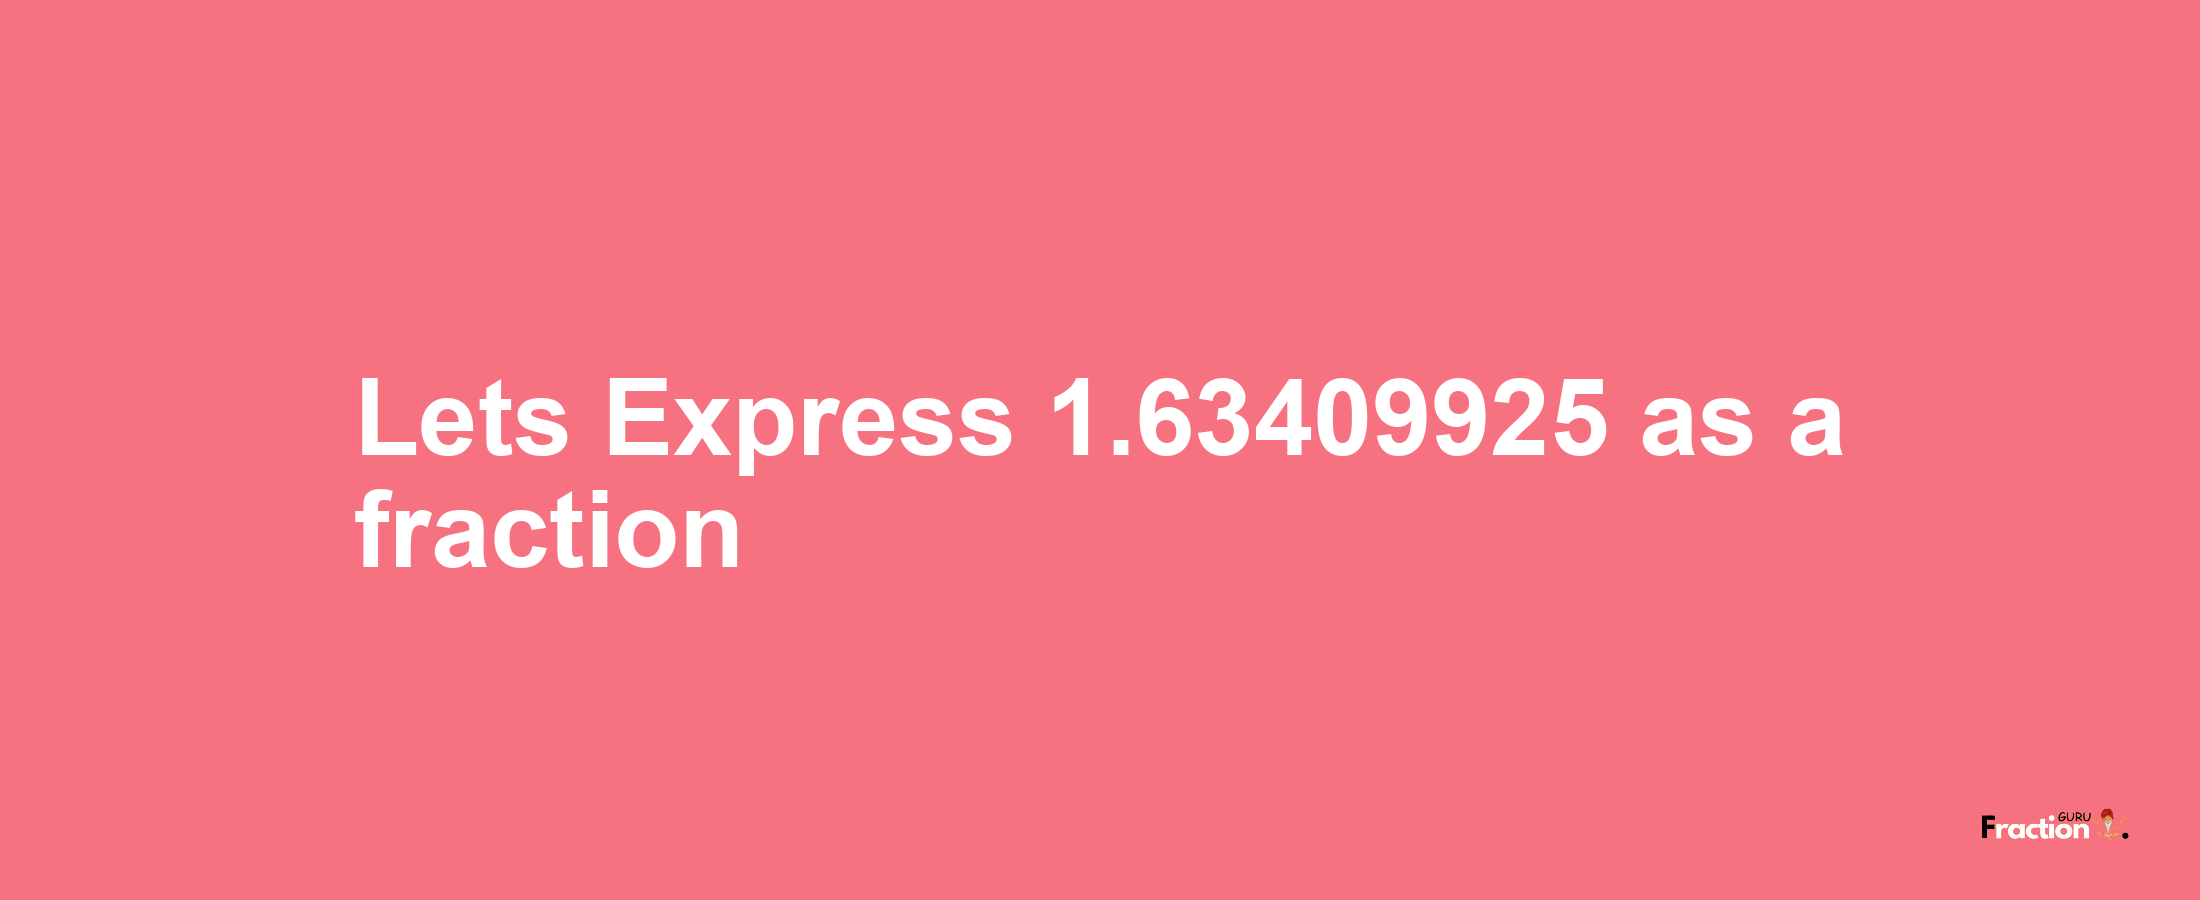 Lets Express 1.63409925 as afraction